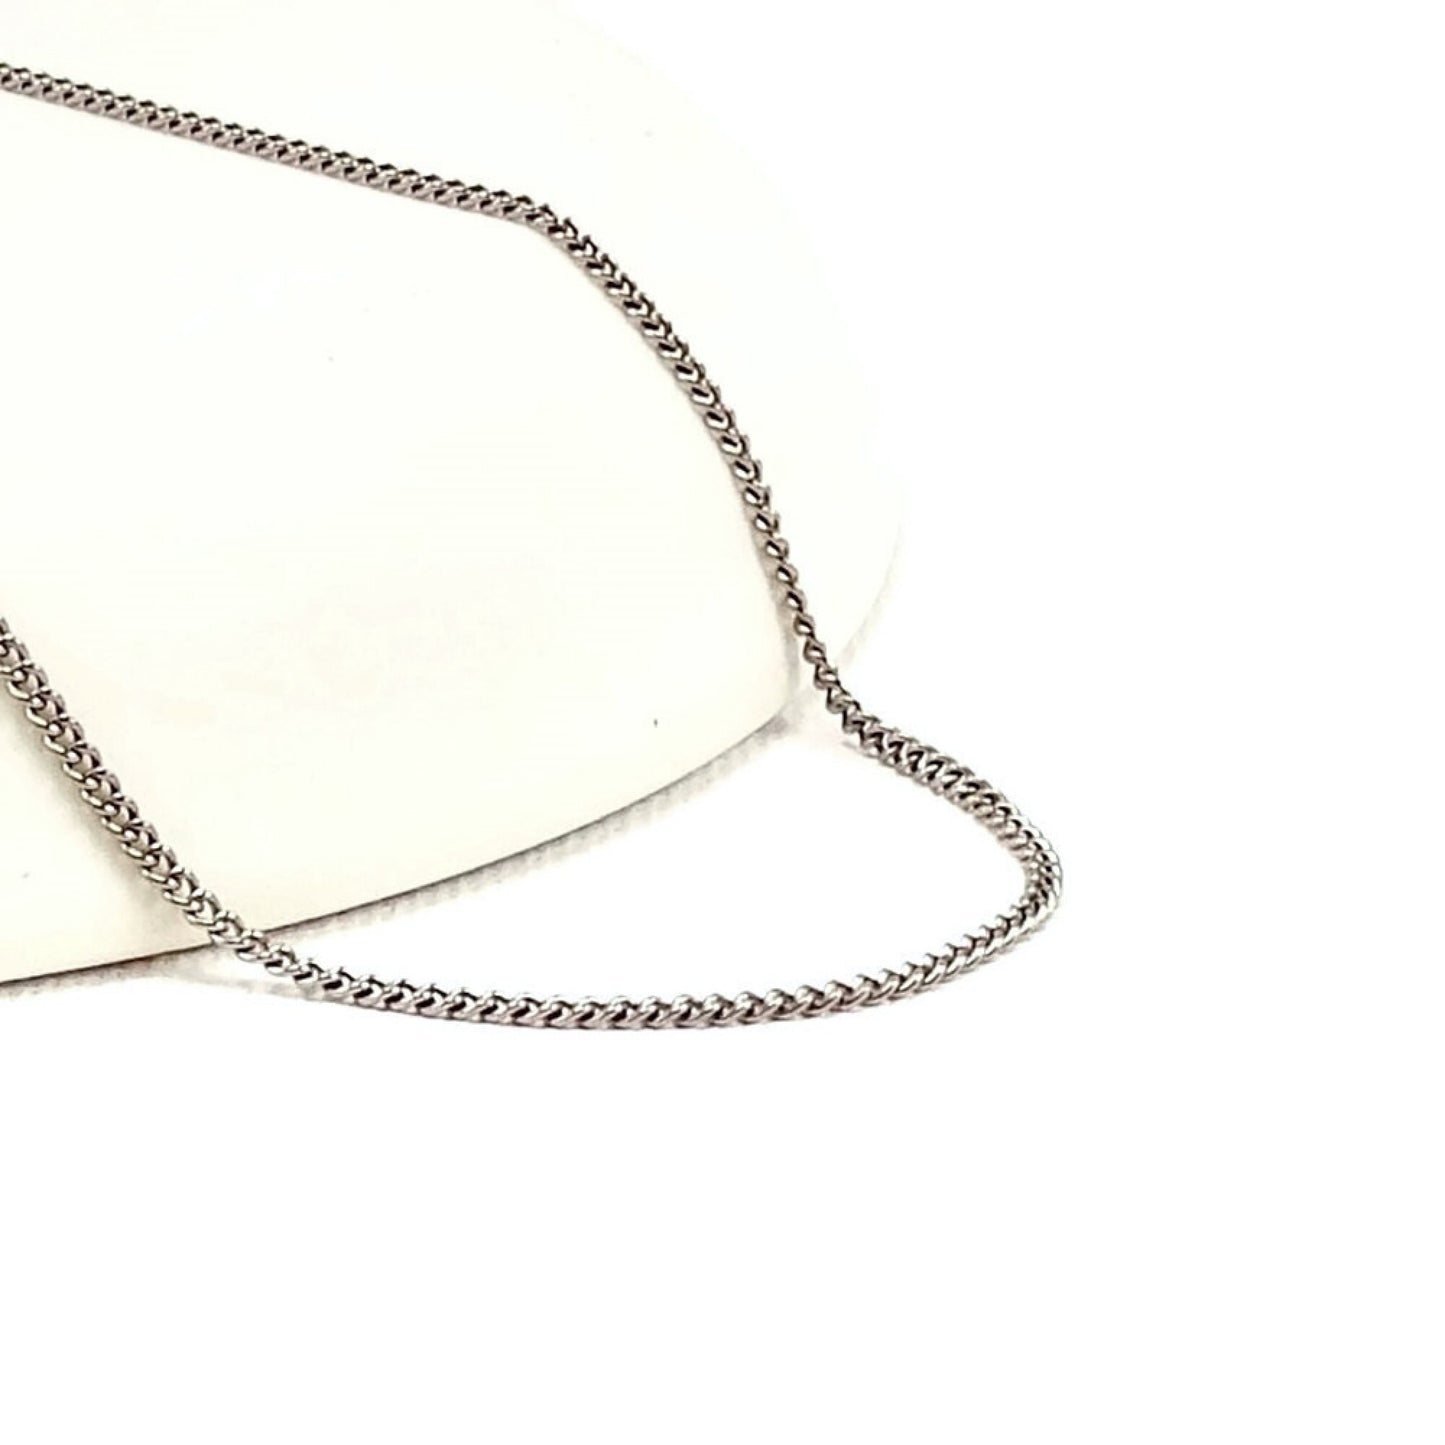 Titanium Necklace, Pure Titanium Chain Necklace for Sensitive Skin, Curb Chain, Hypoallergenic Nickel Free Necklace, Add Your Own Pendant